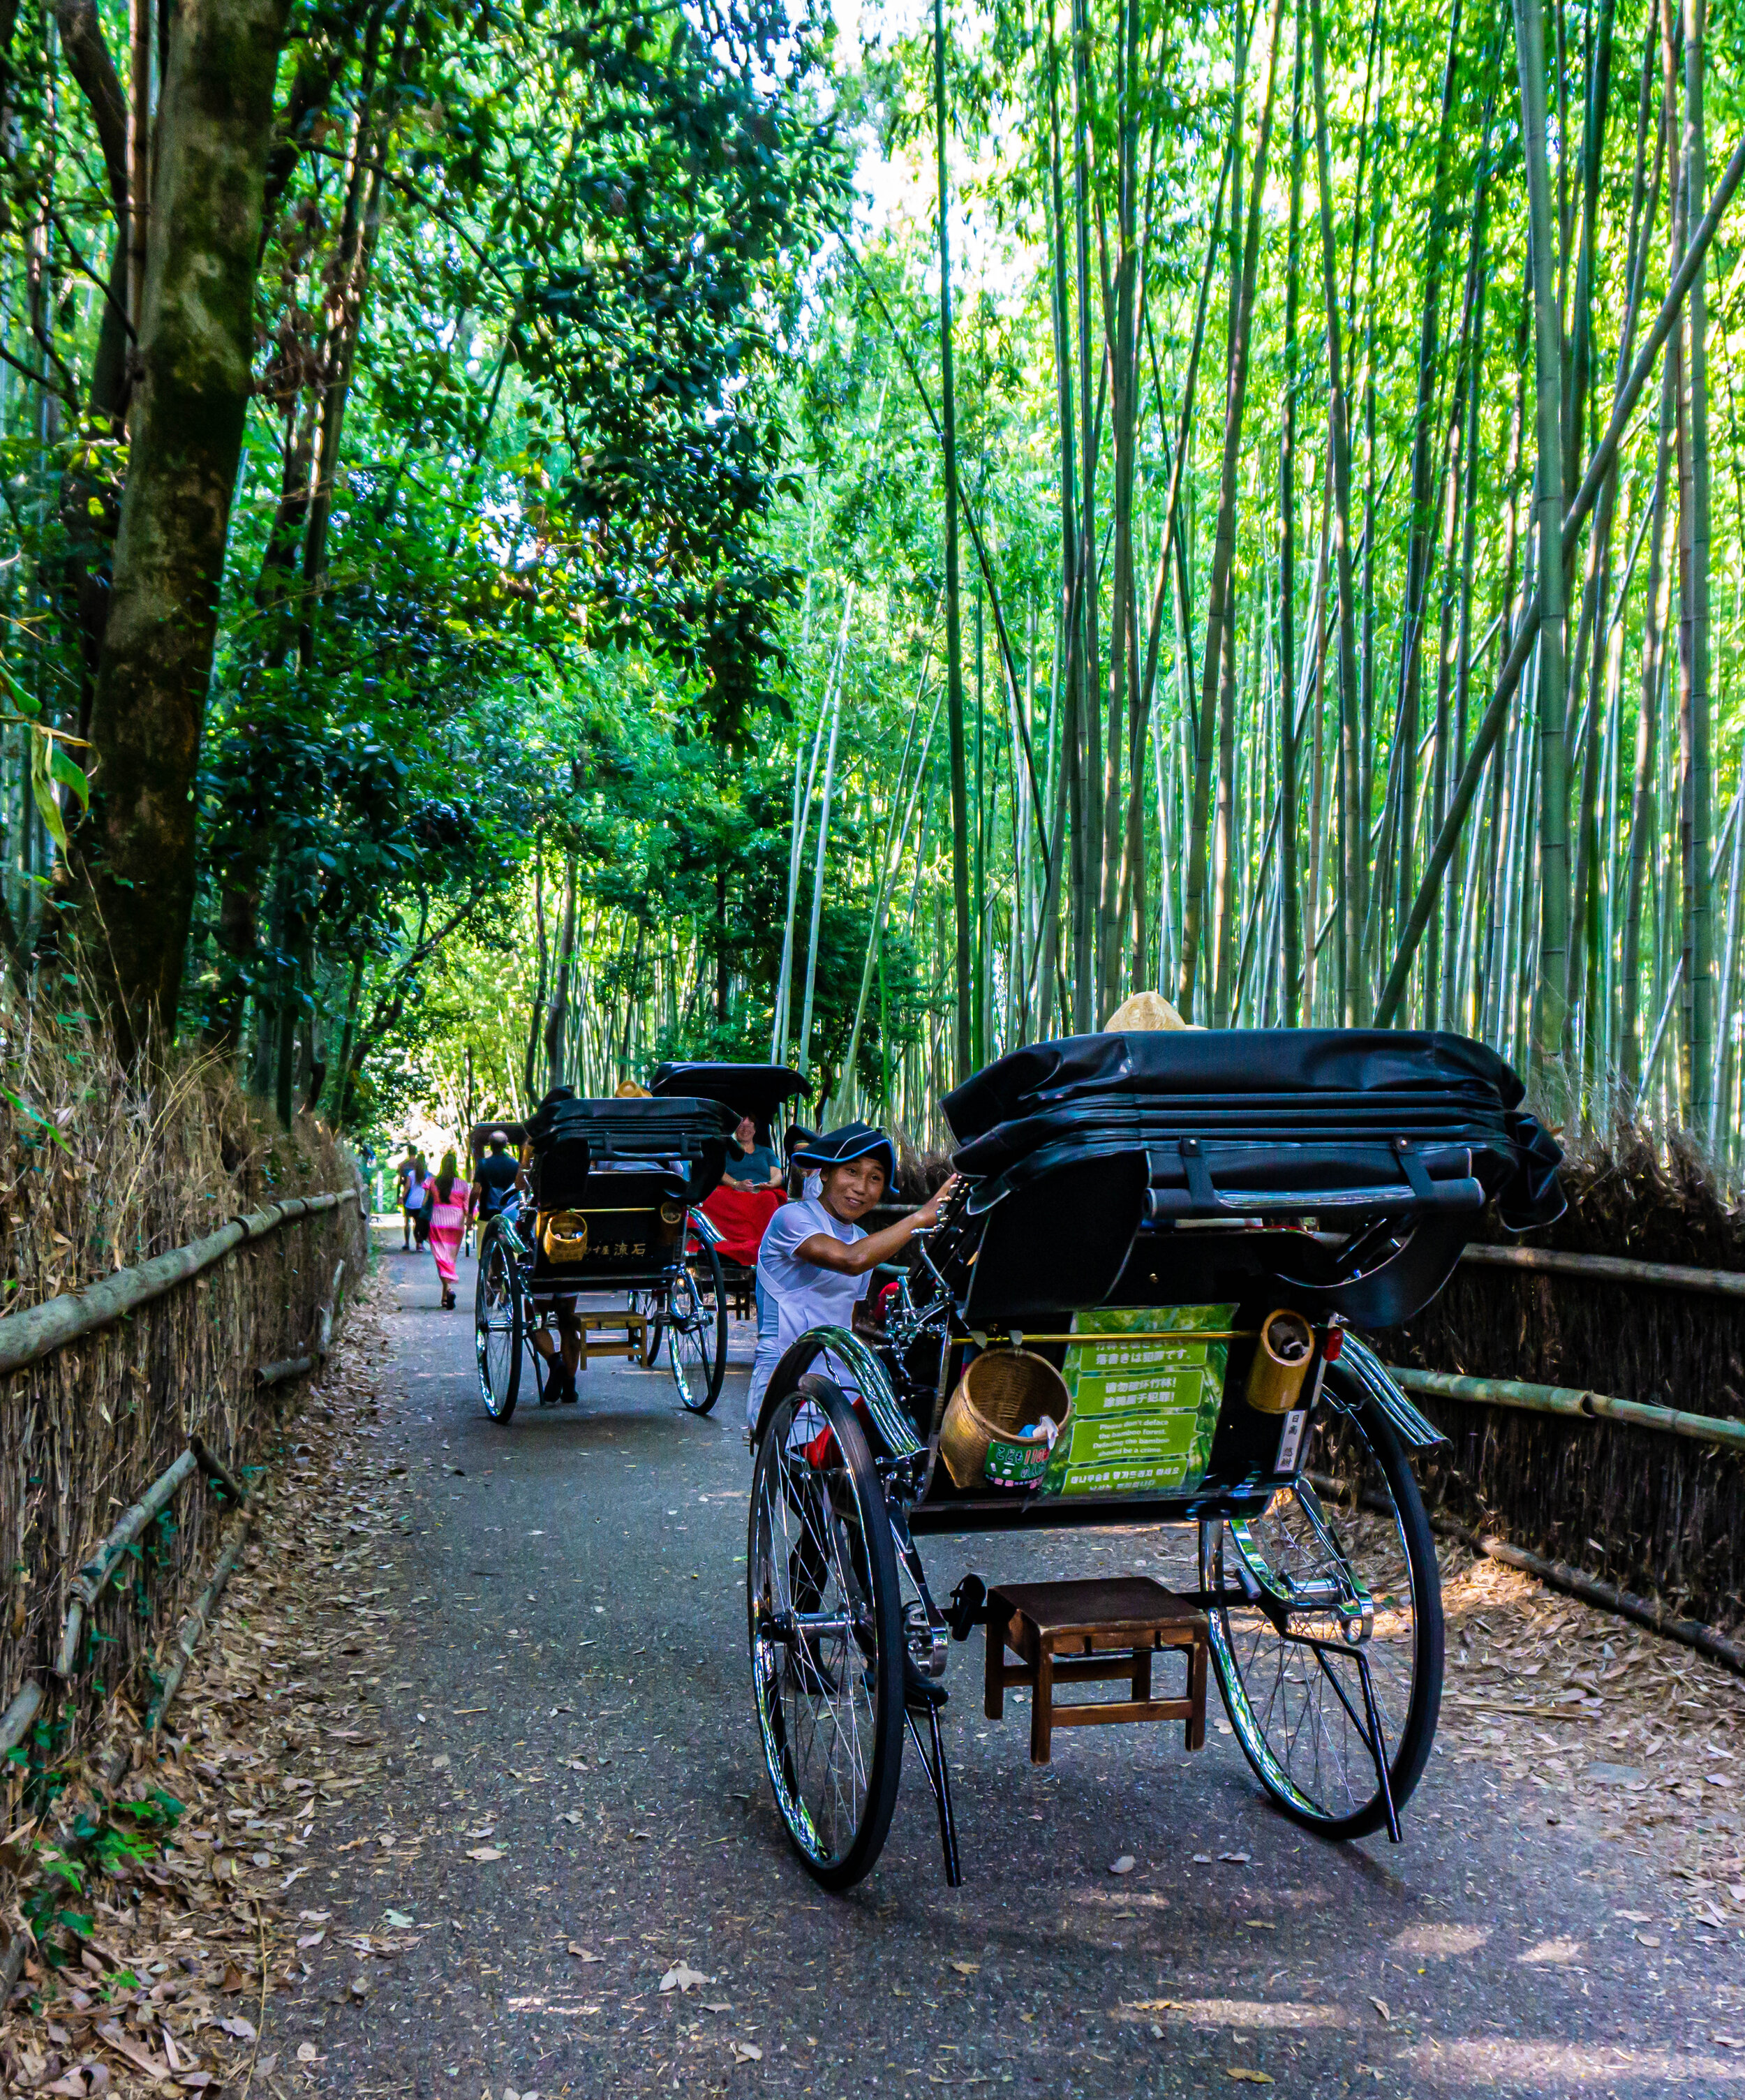 Bamboo Forest Cart Driver